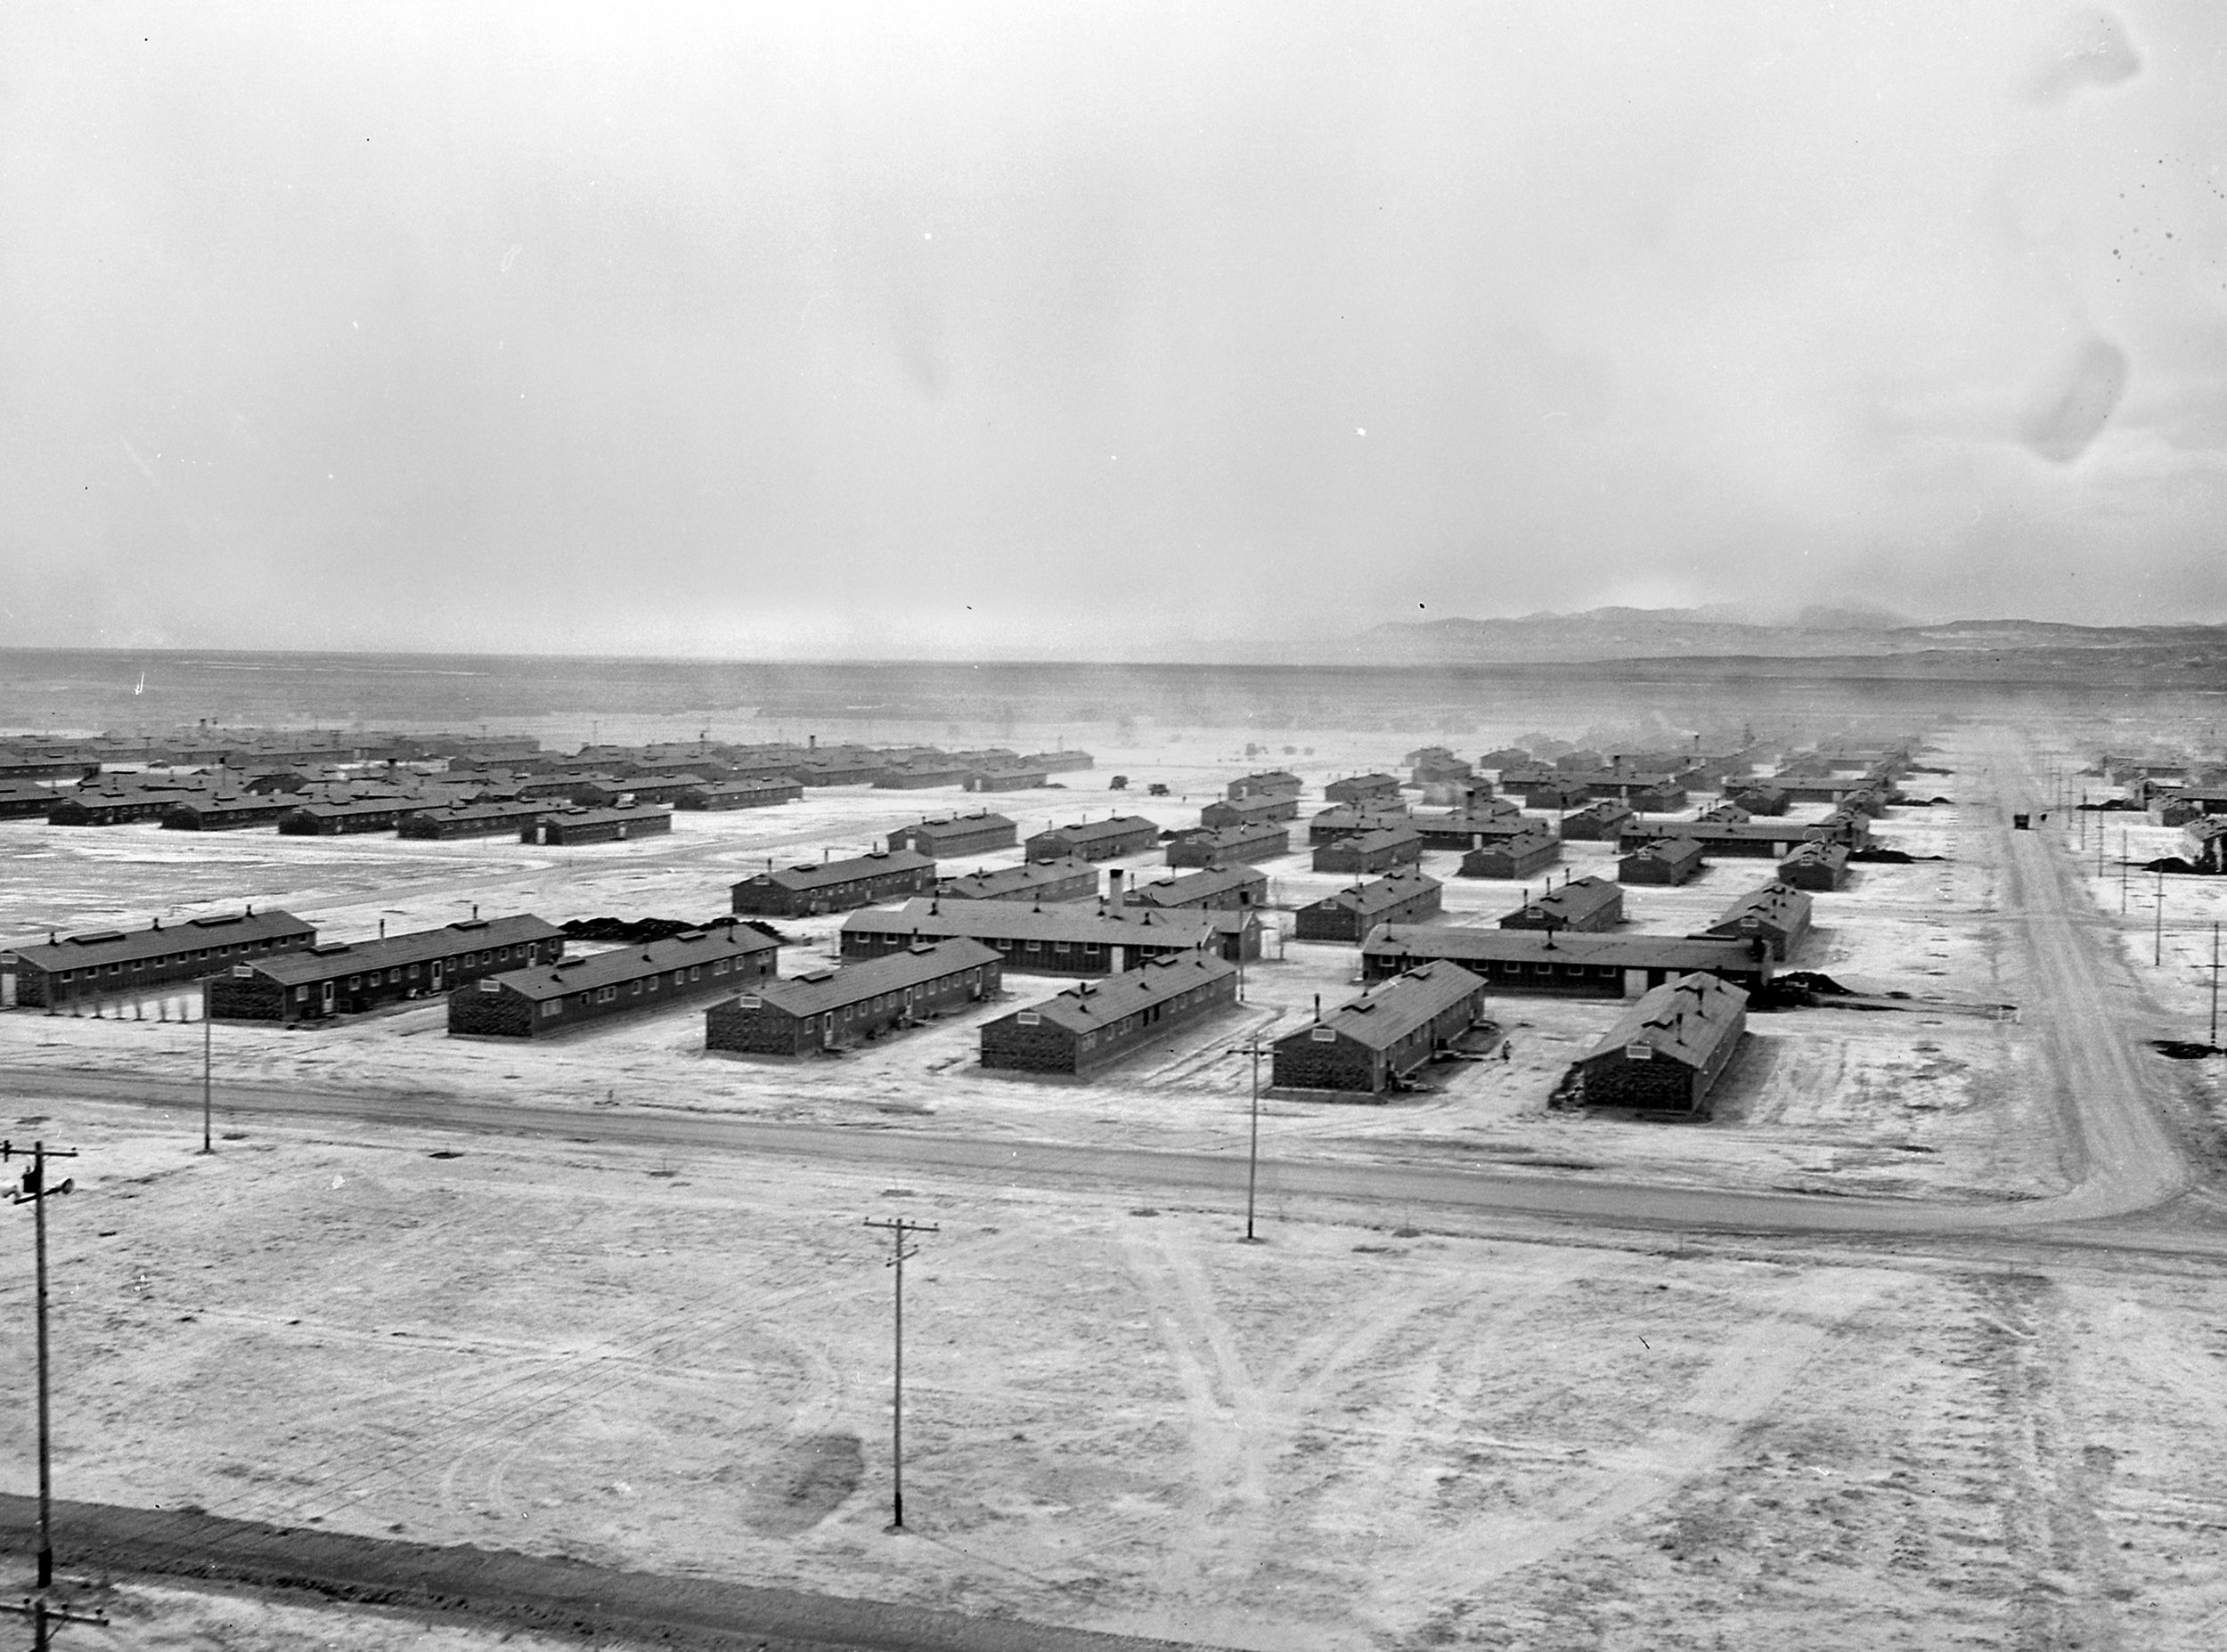 This bleak 1942 aerial view depicts the relocation center at Topaz, Utah. The center became the temporary home of 9,000 Japanese-Americans who were forcibly removed from areas on the U.S. West Coast. The camp was closed in October 1945.